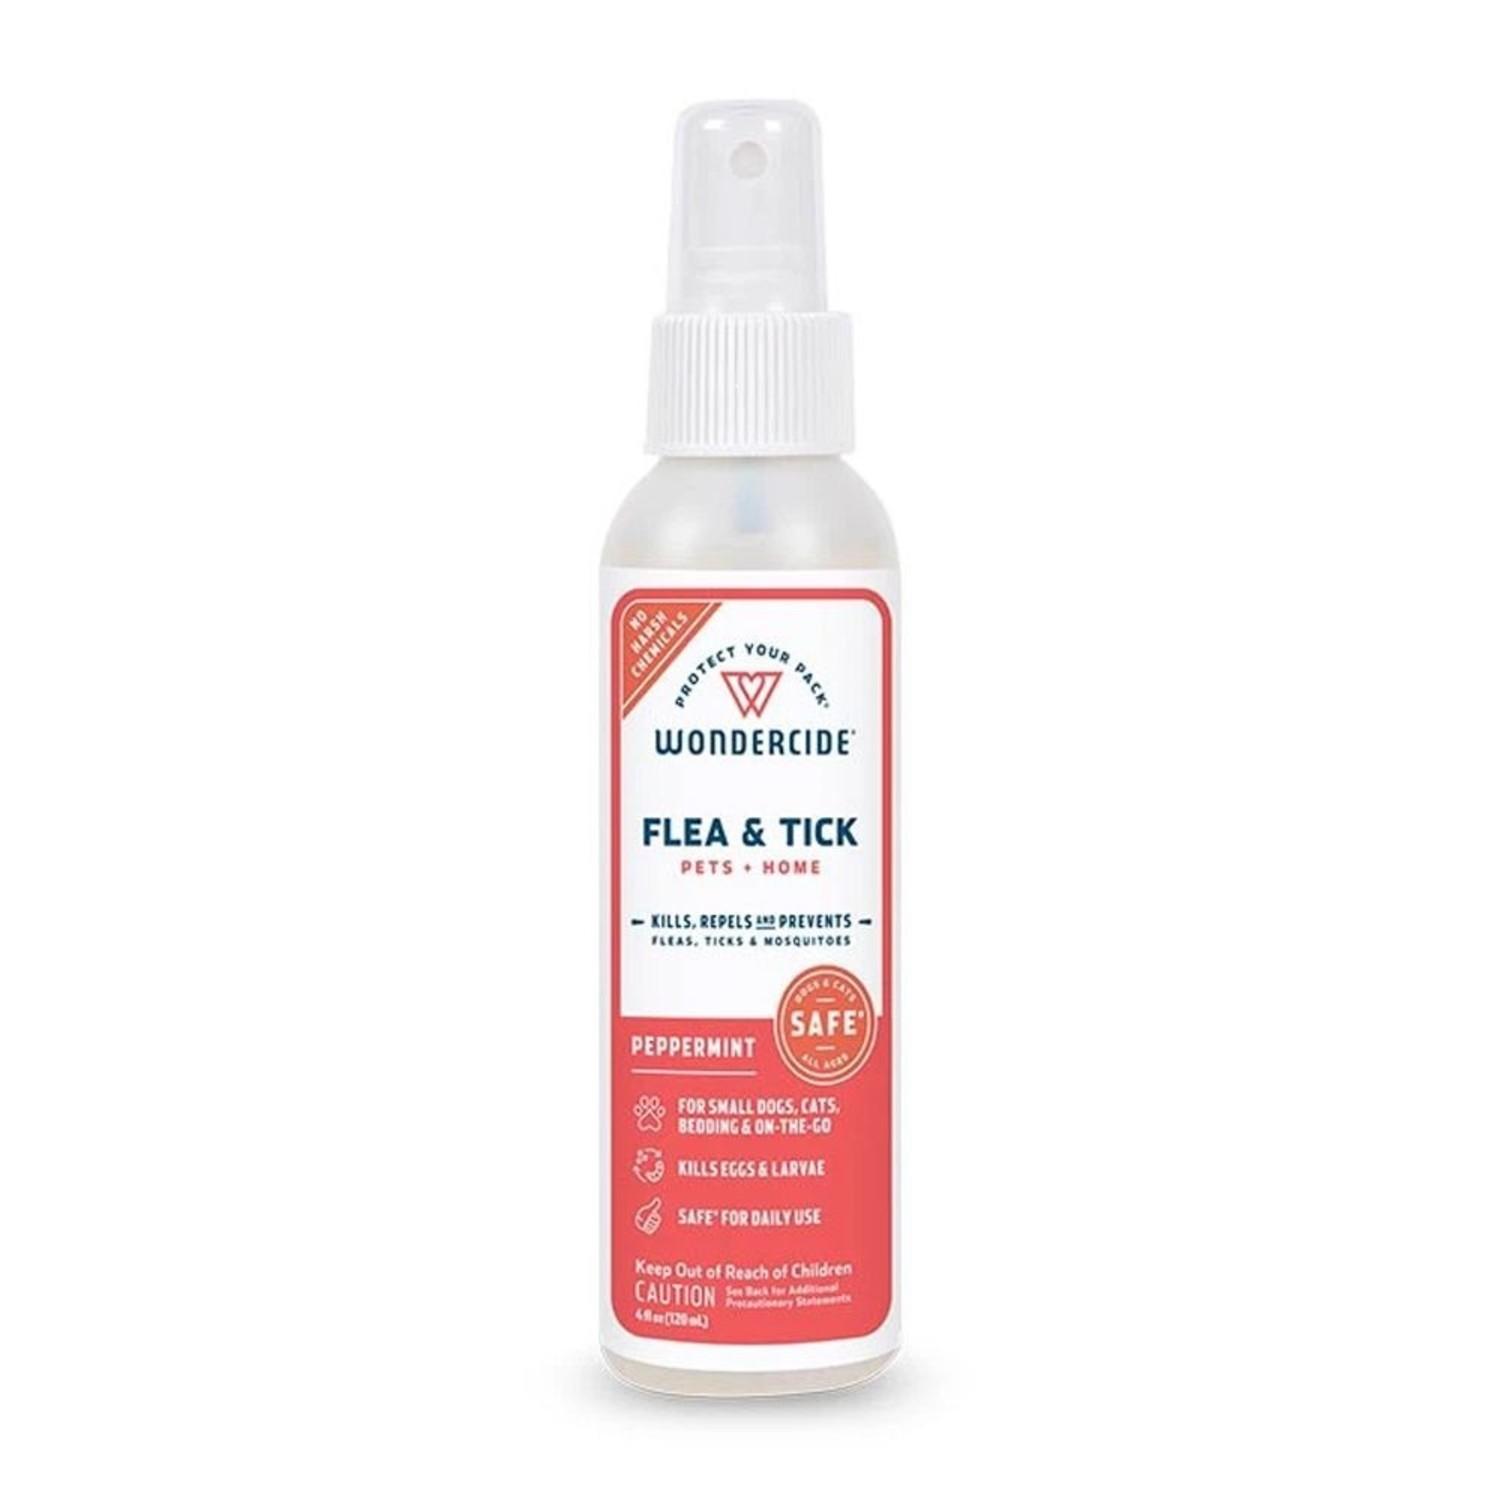 Wondercide Flea, Tick & Mosquito Spray for Pets + Home - Peppermint Scent